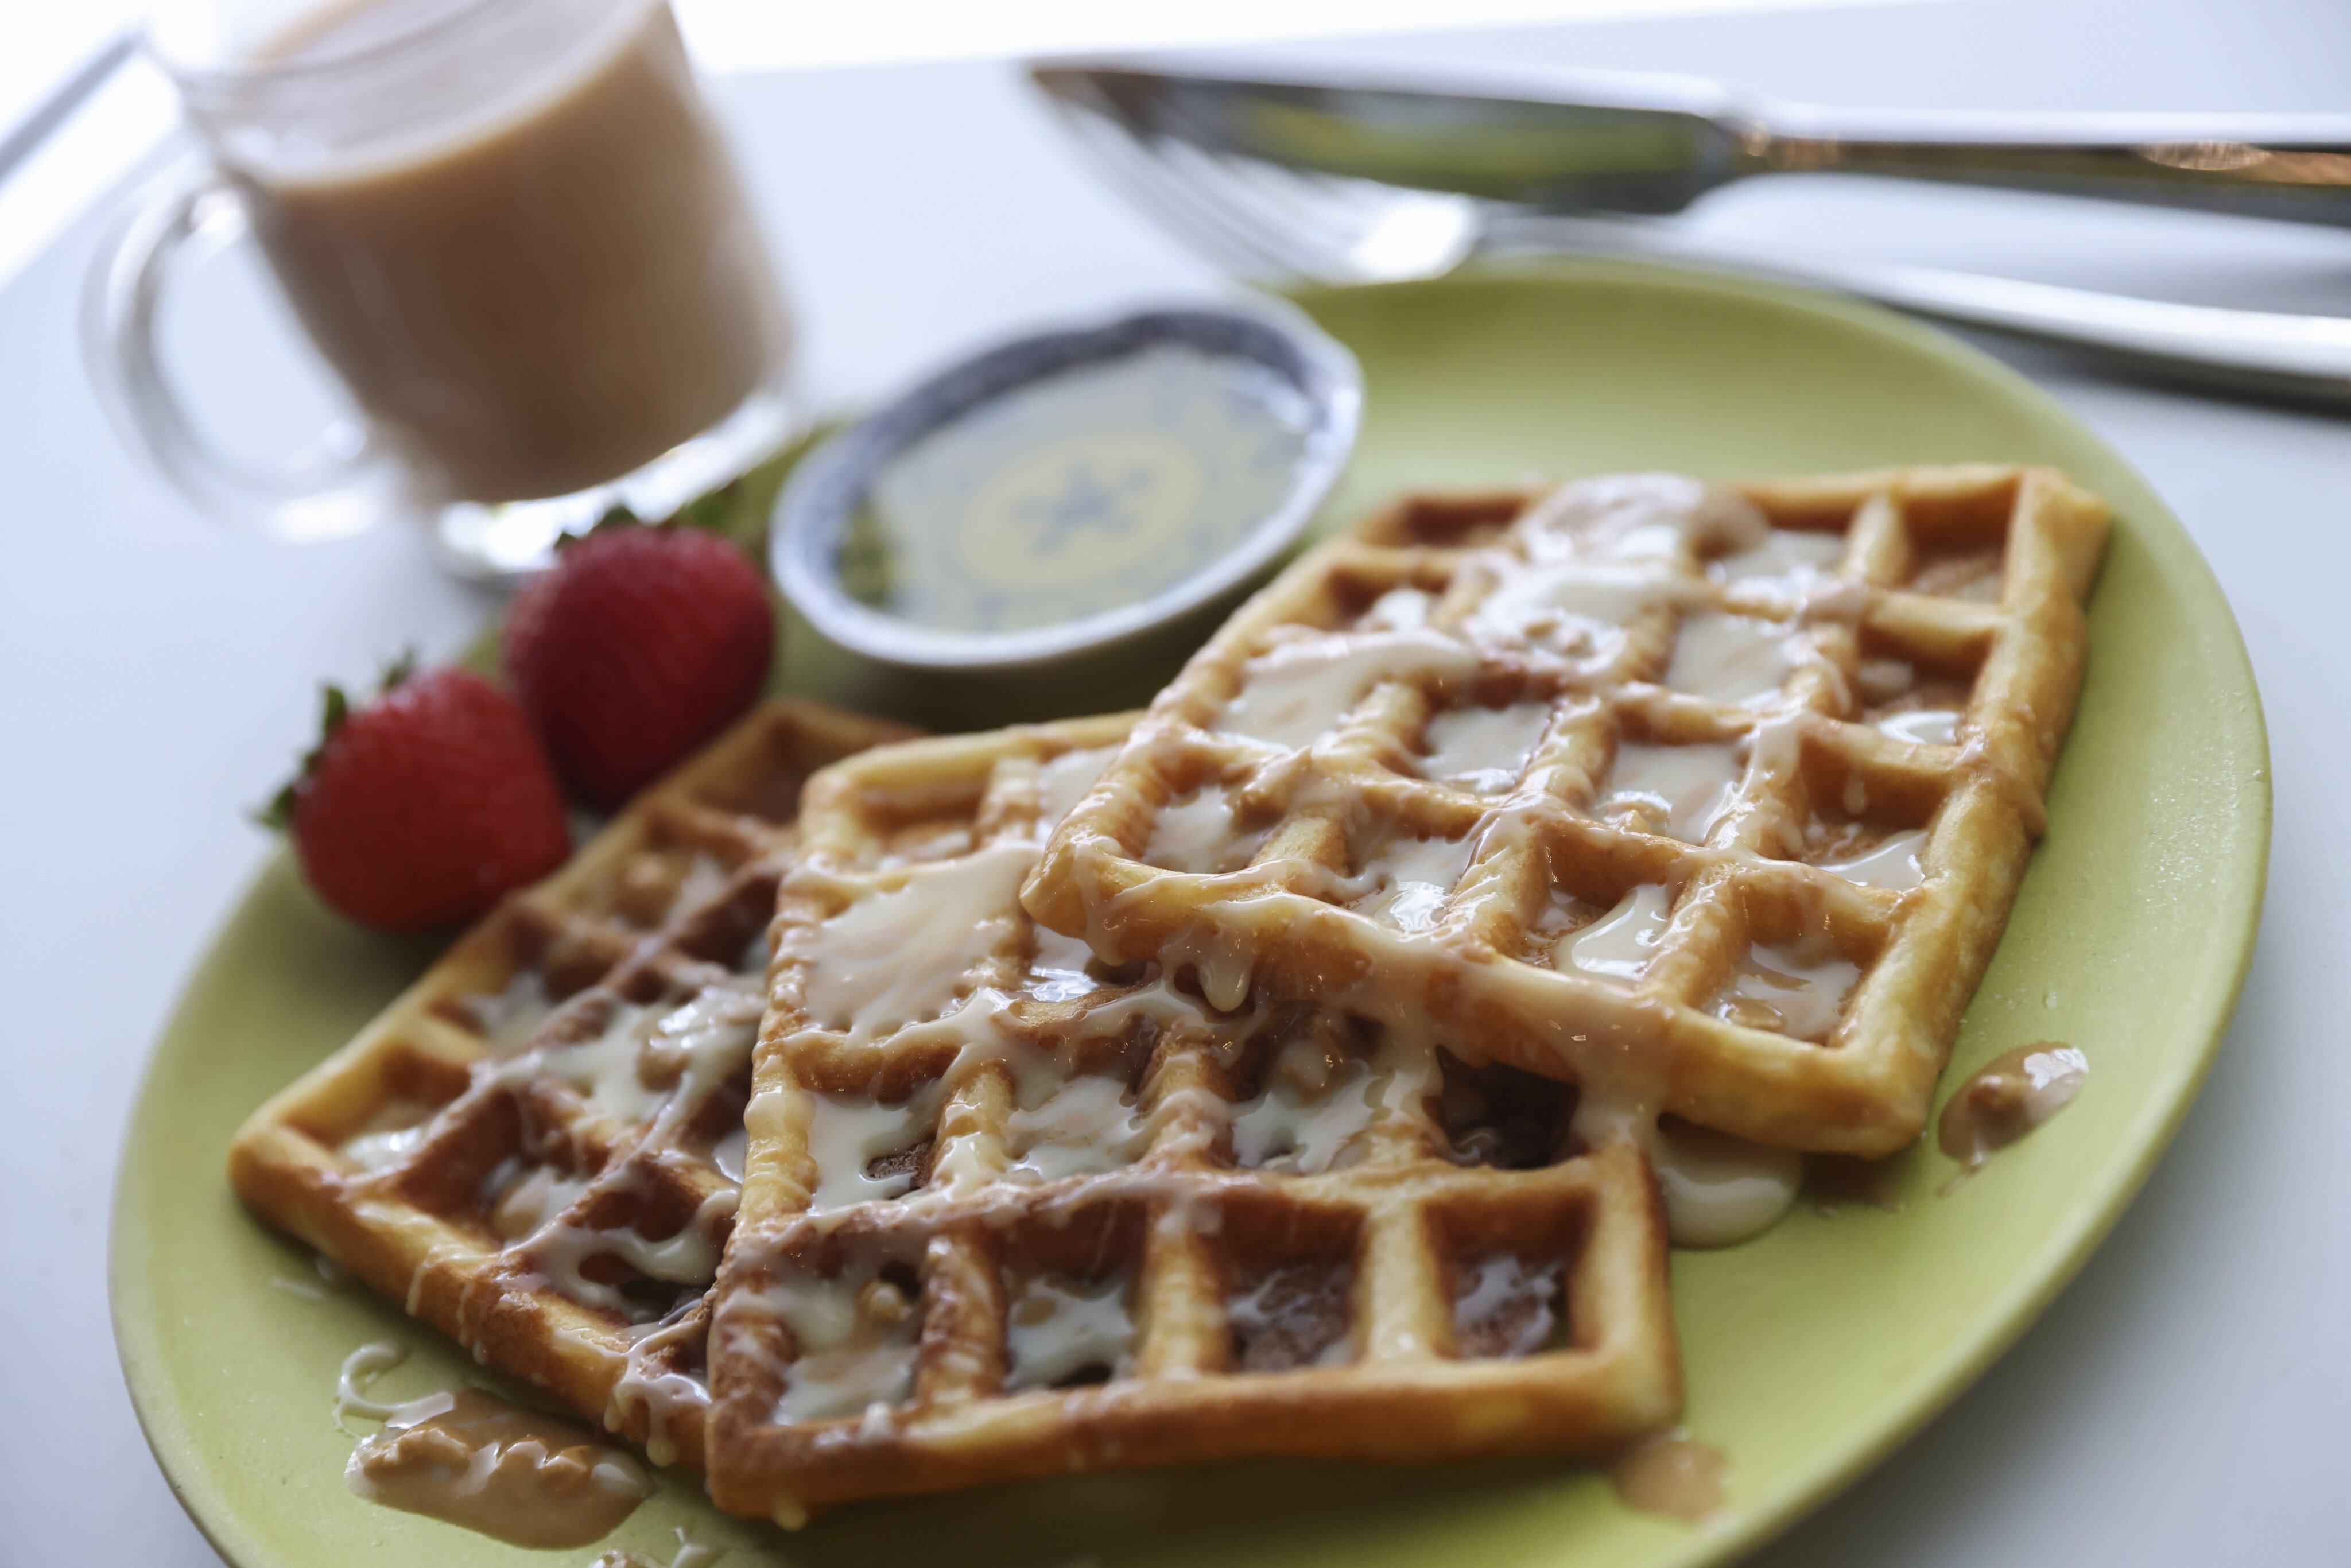 Hong Kong-style waffles. We offer two recipes for this street food favourite, one quick, one overnight. Photo: May Tse